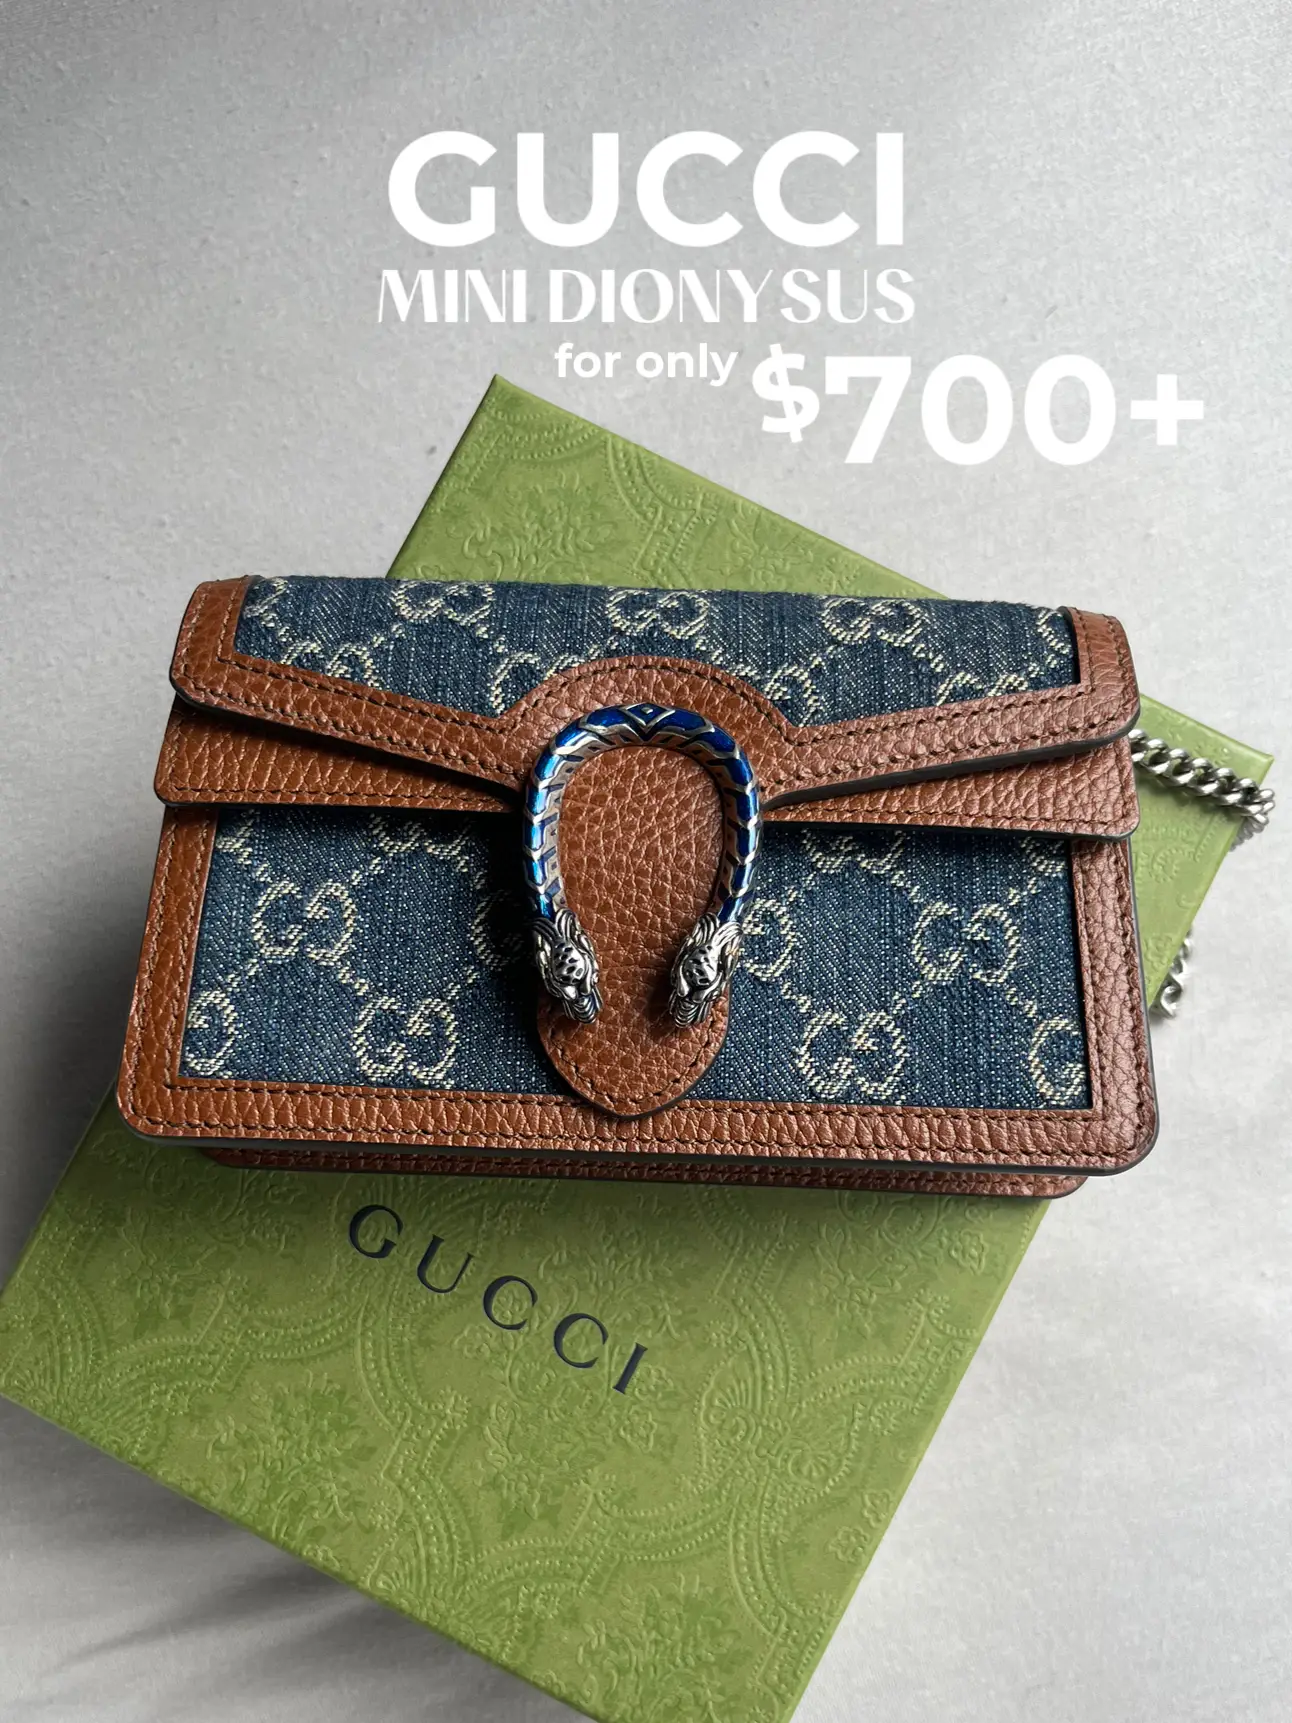 Gucci Outlet Bag Unboxing  Cheap or Quality? 